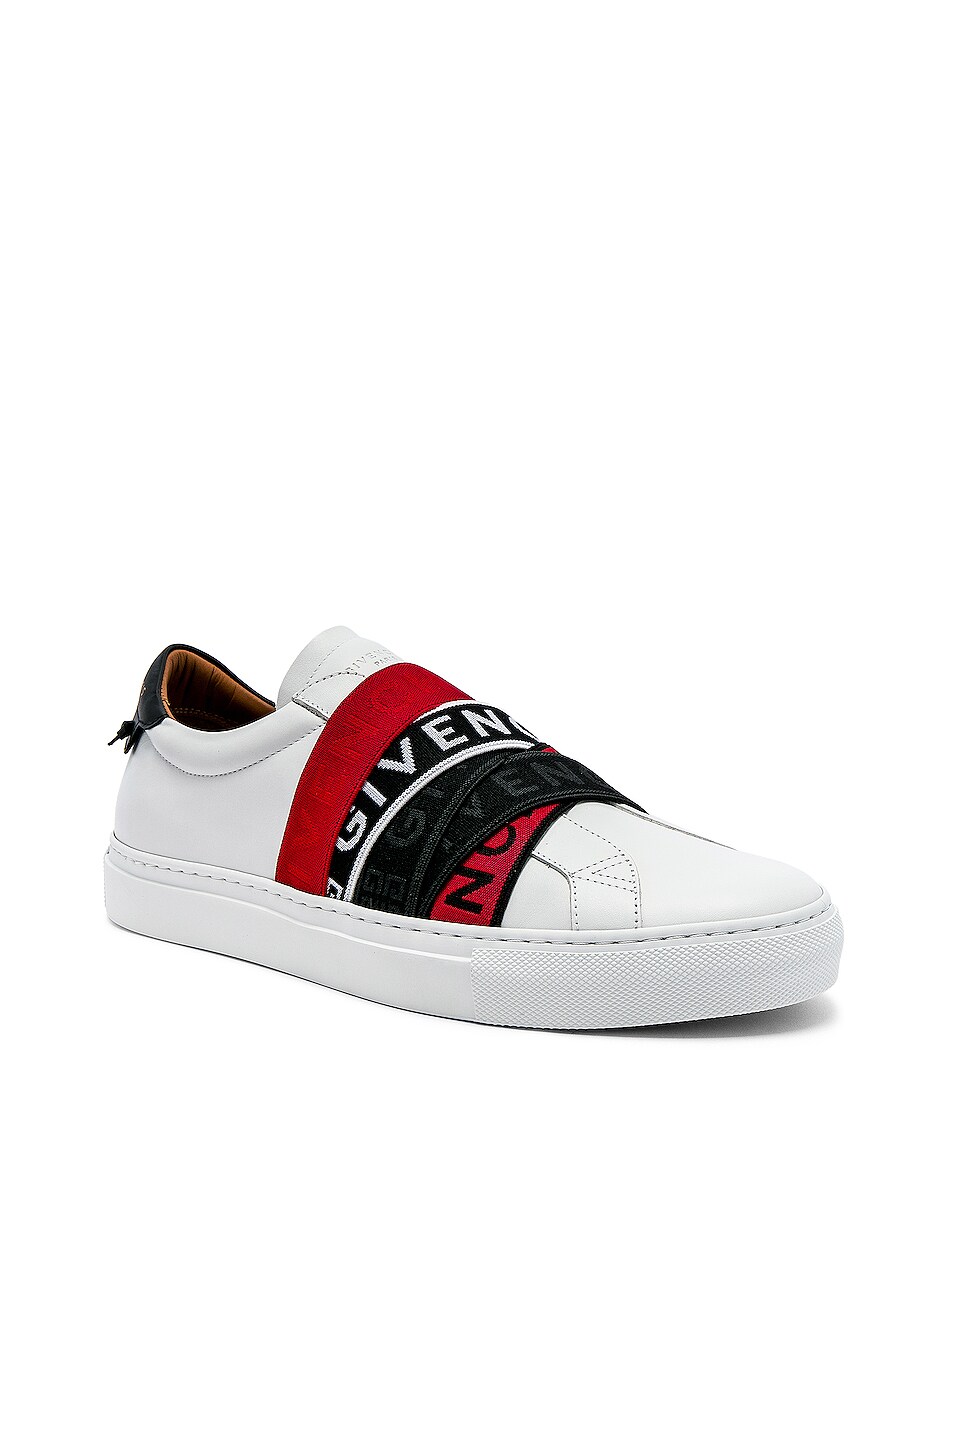 Image 1 of Givenchy Elastic Webbing Sneakers in White, Red & Black